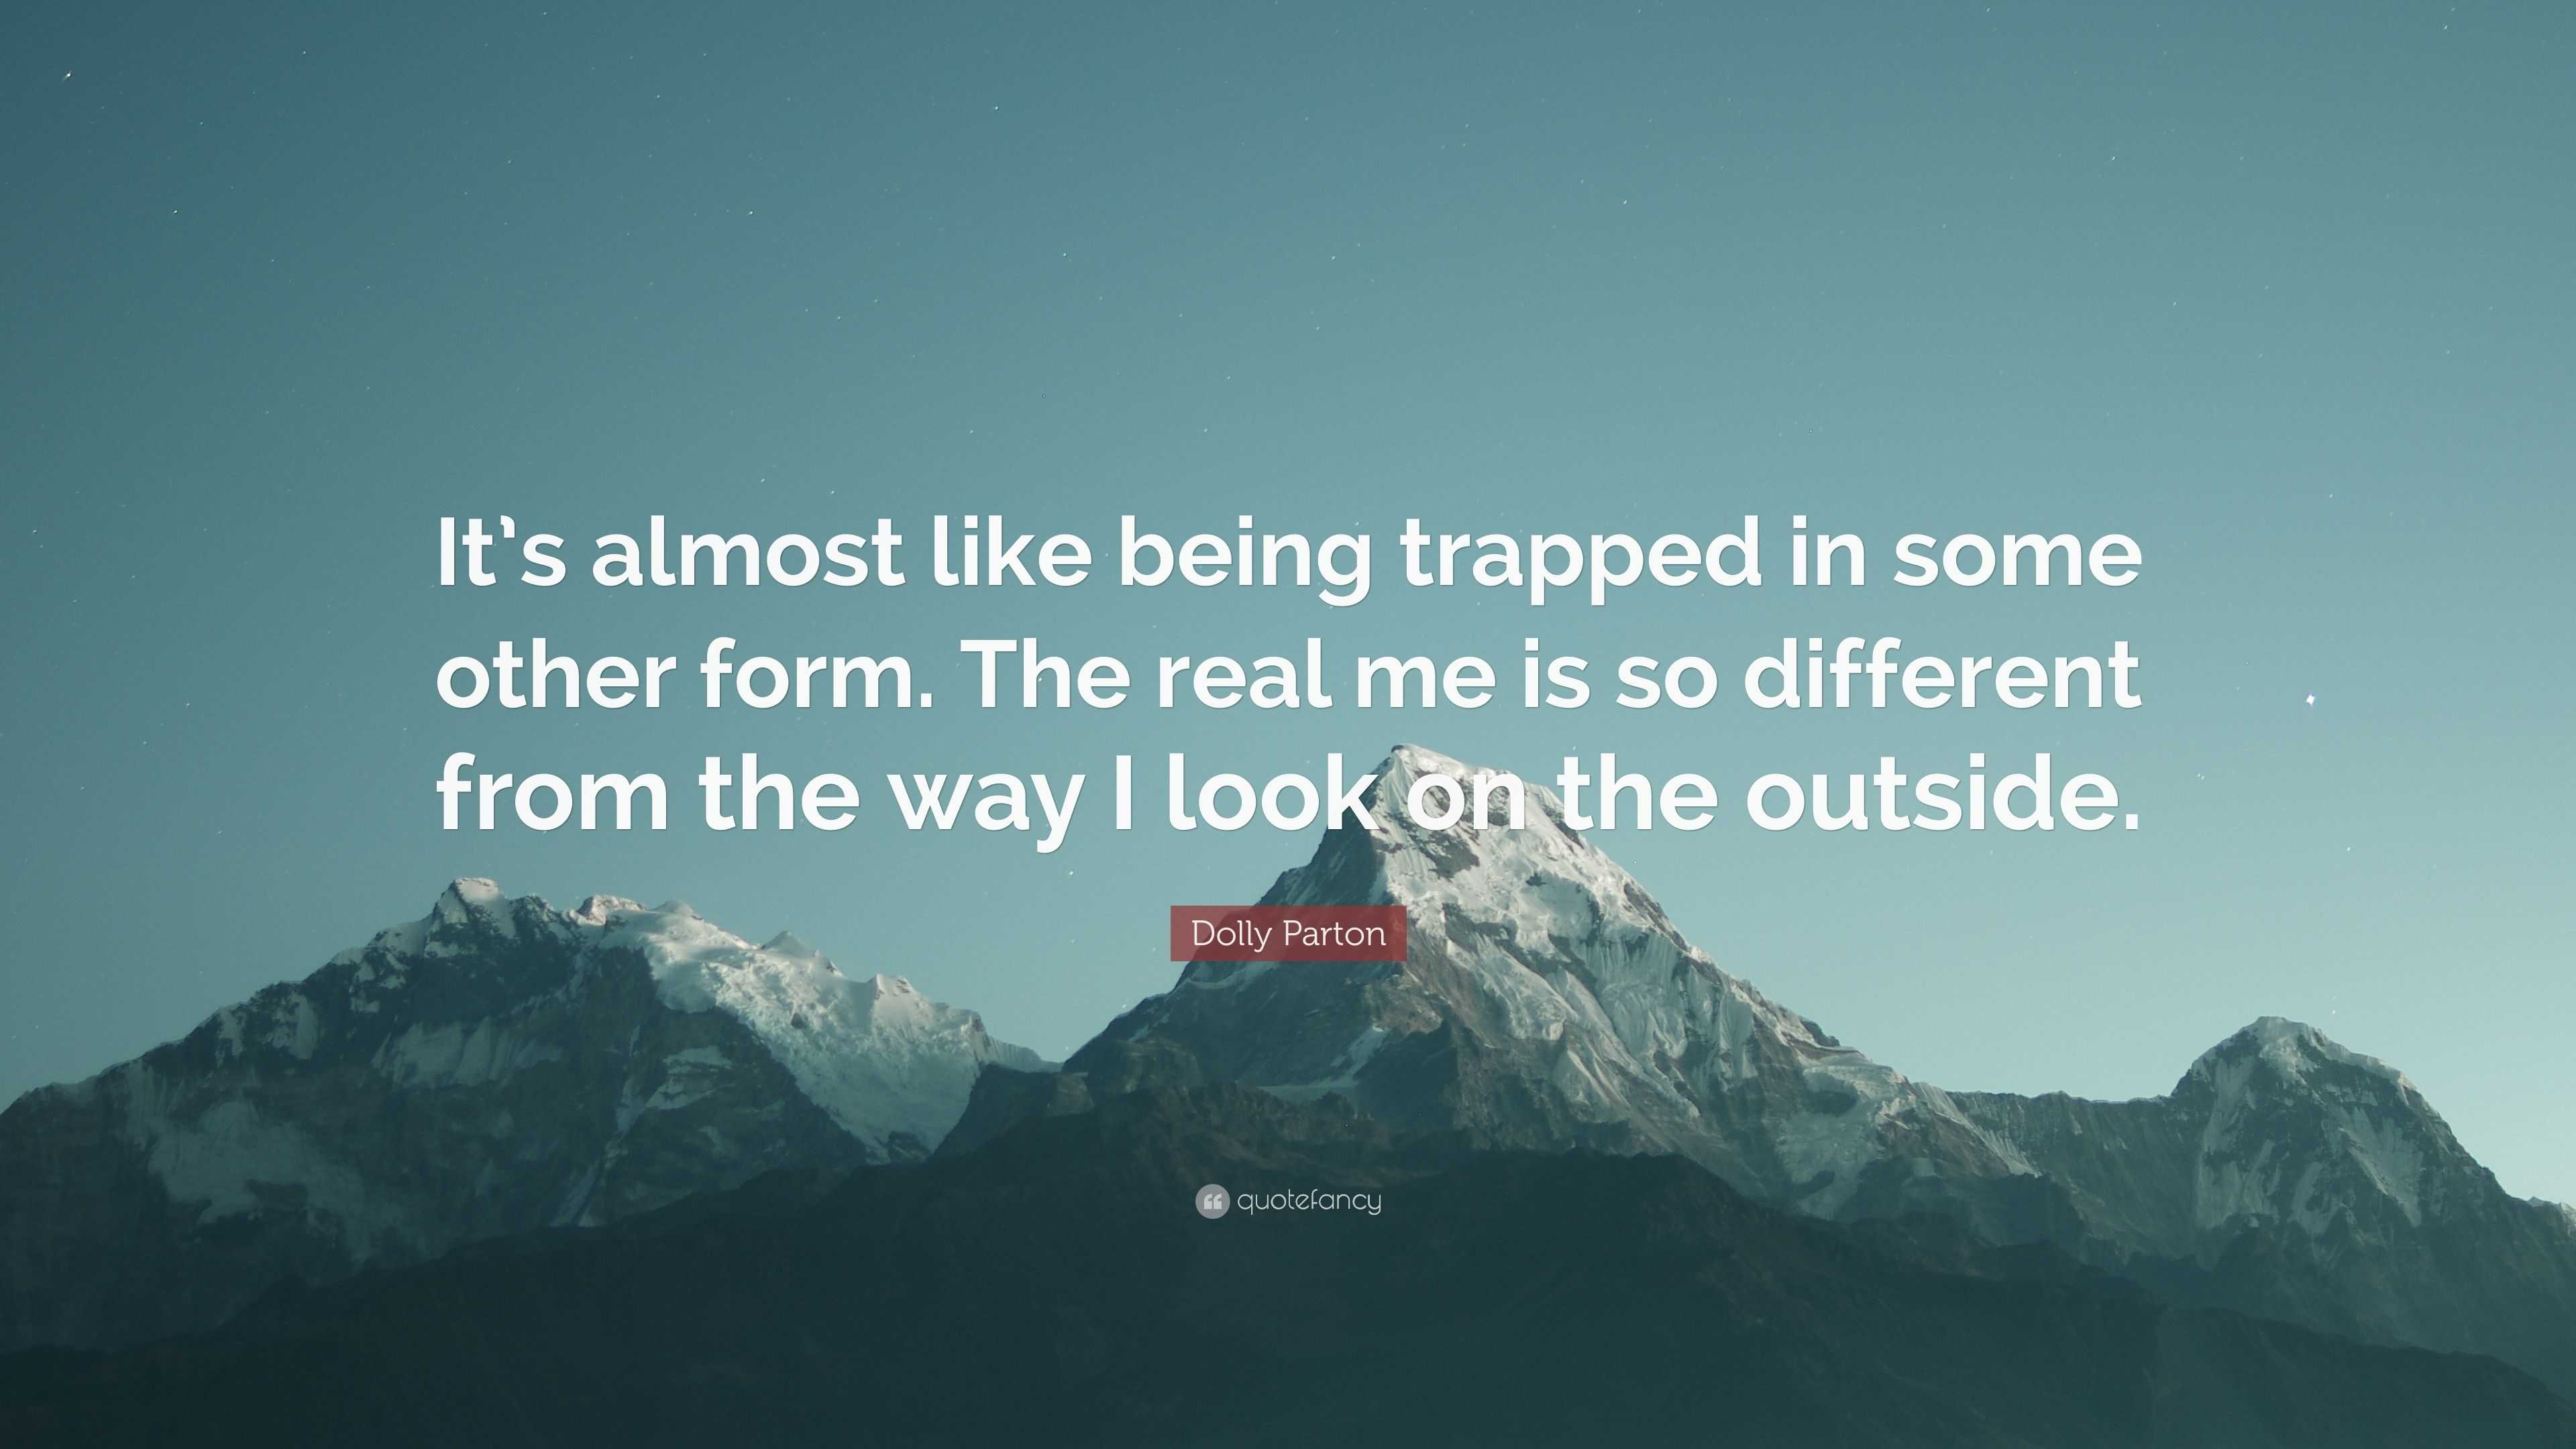 Dolly Parton Quote: “It's almost like being trapped in some other